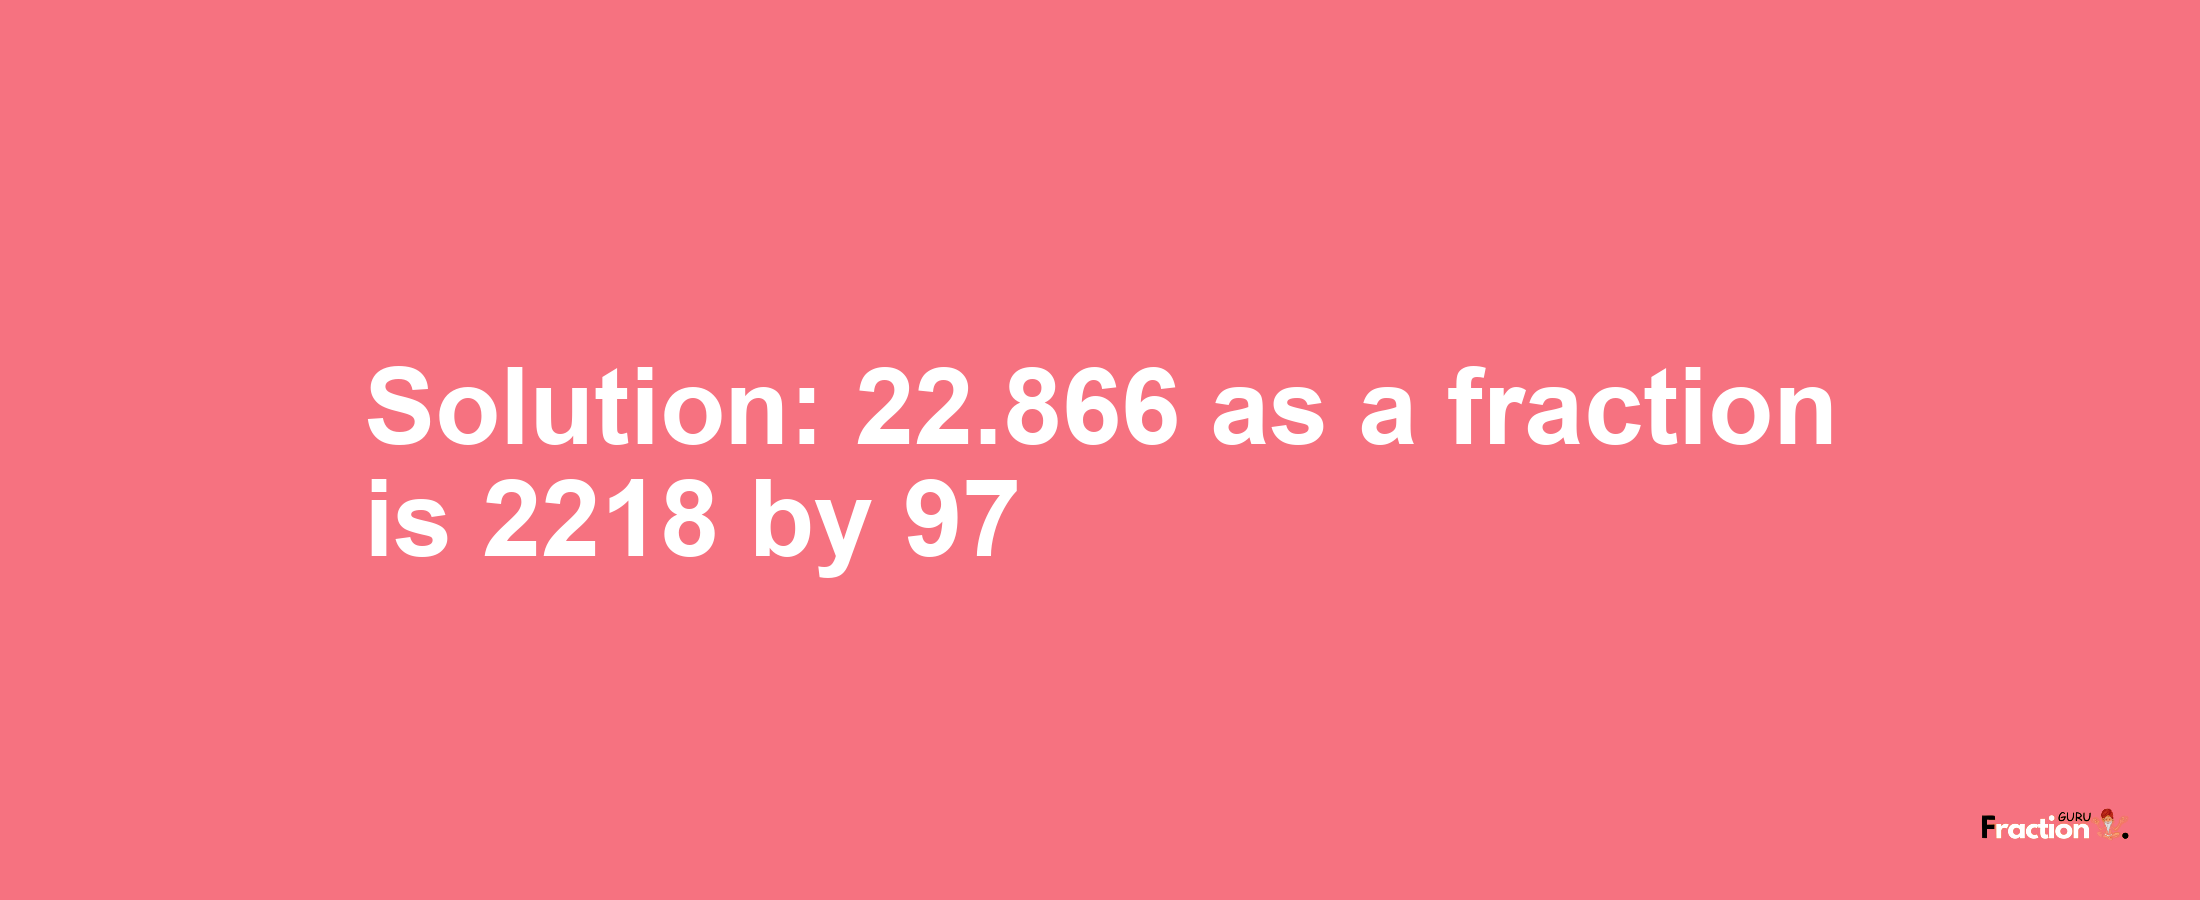 Solution:22.866 as a fraction is 2218/97